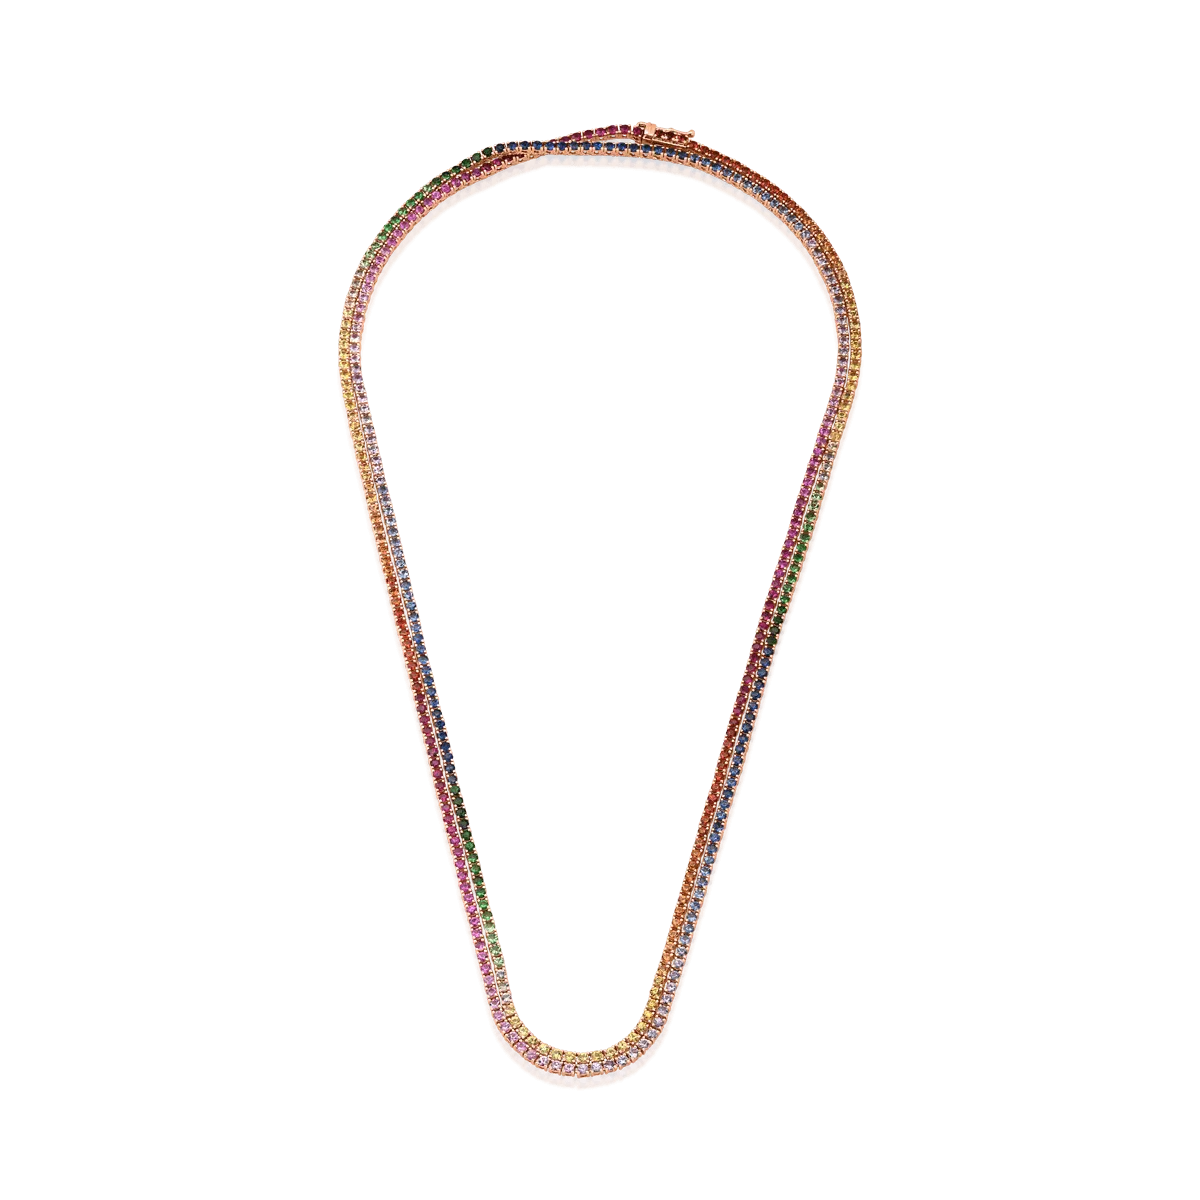 18K rose gold tennis necklace with 13.15ct multicolored sapphires